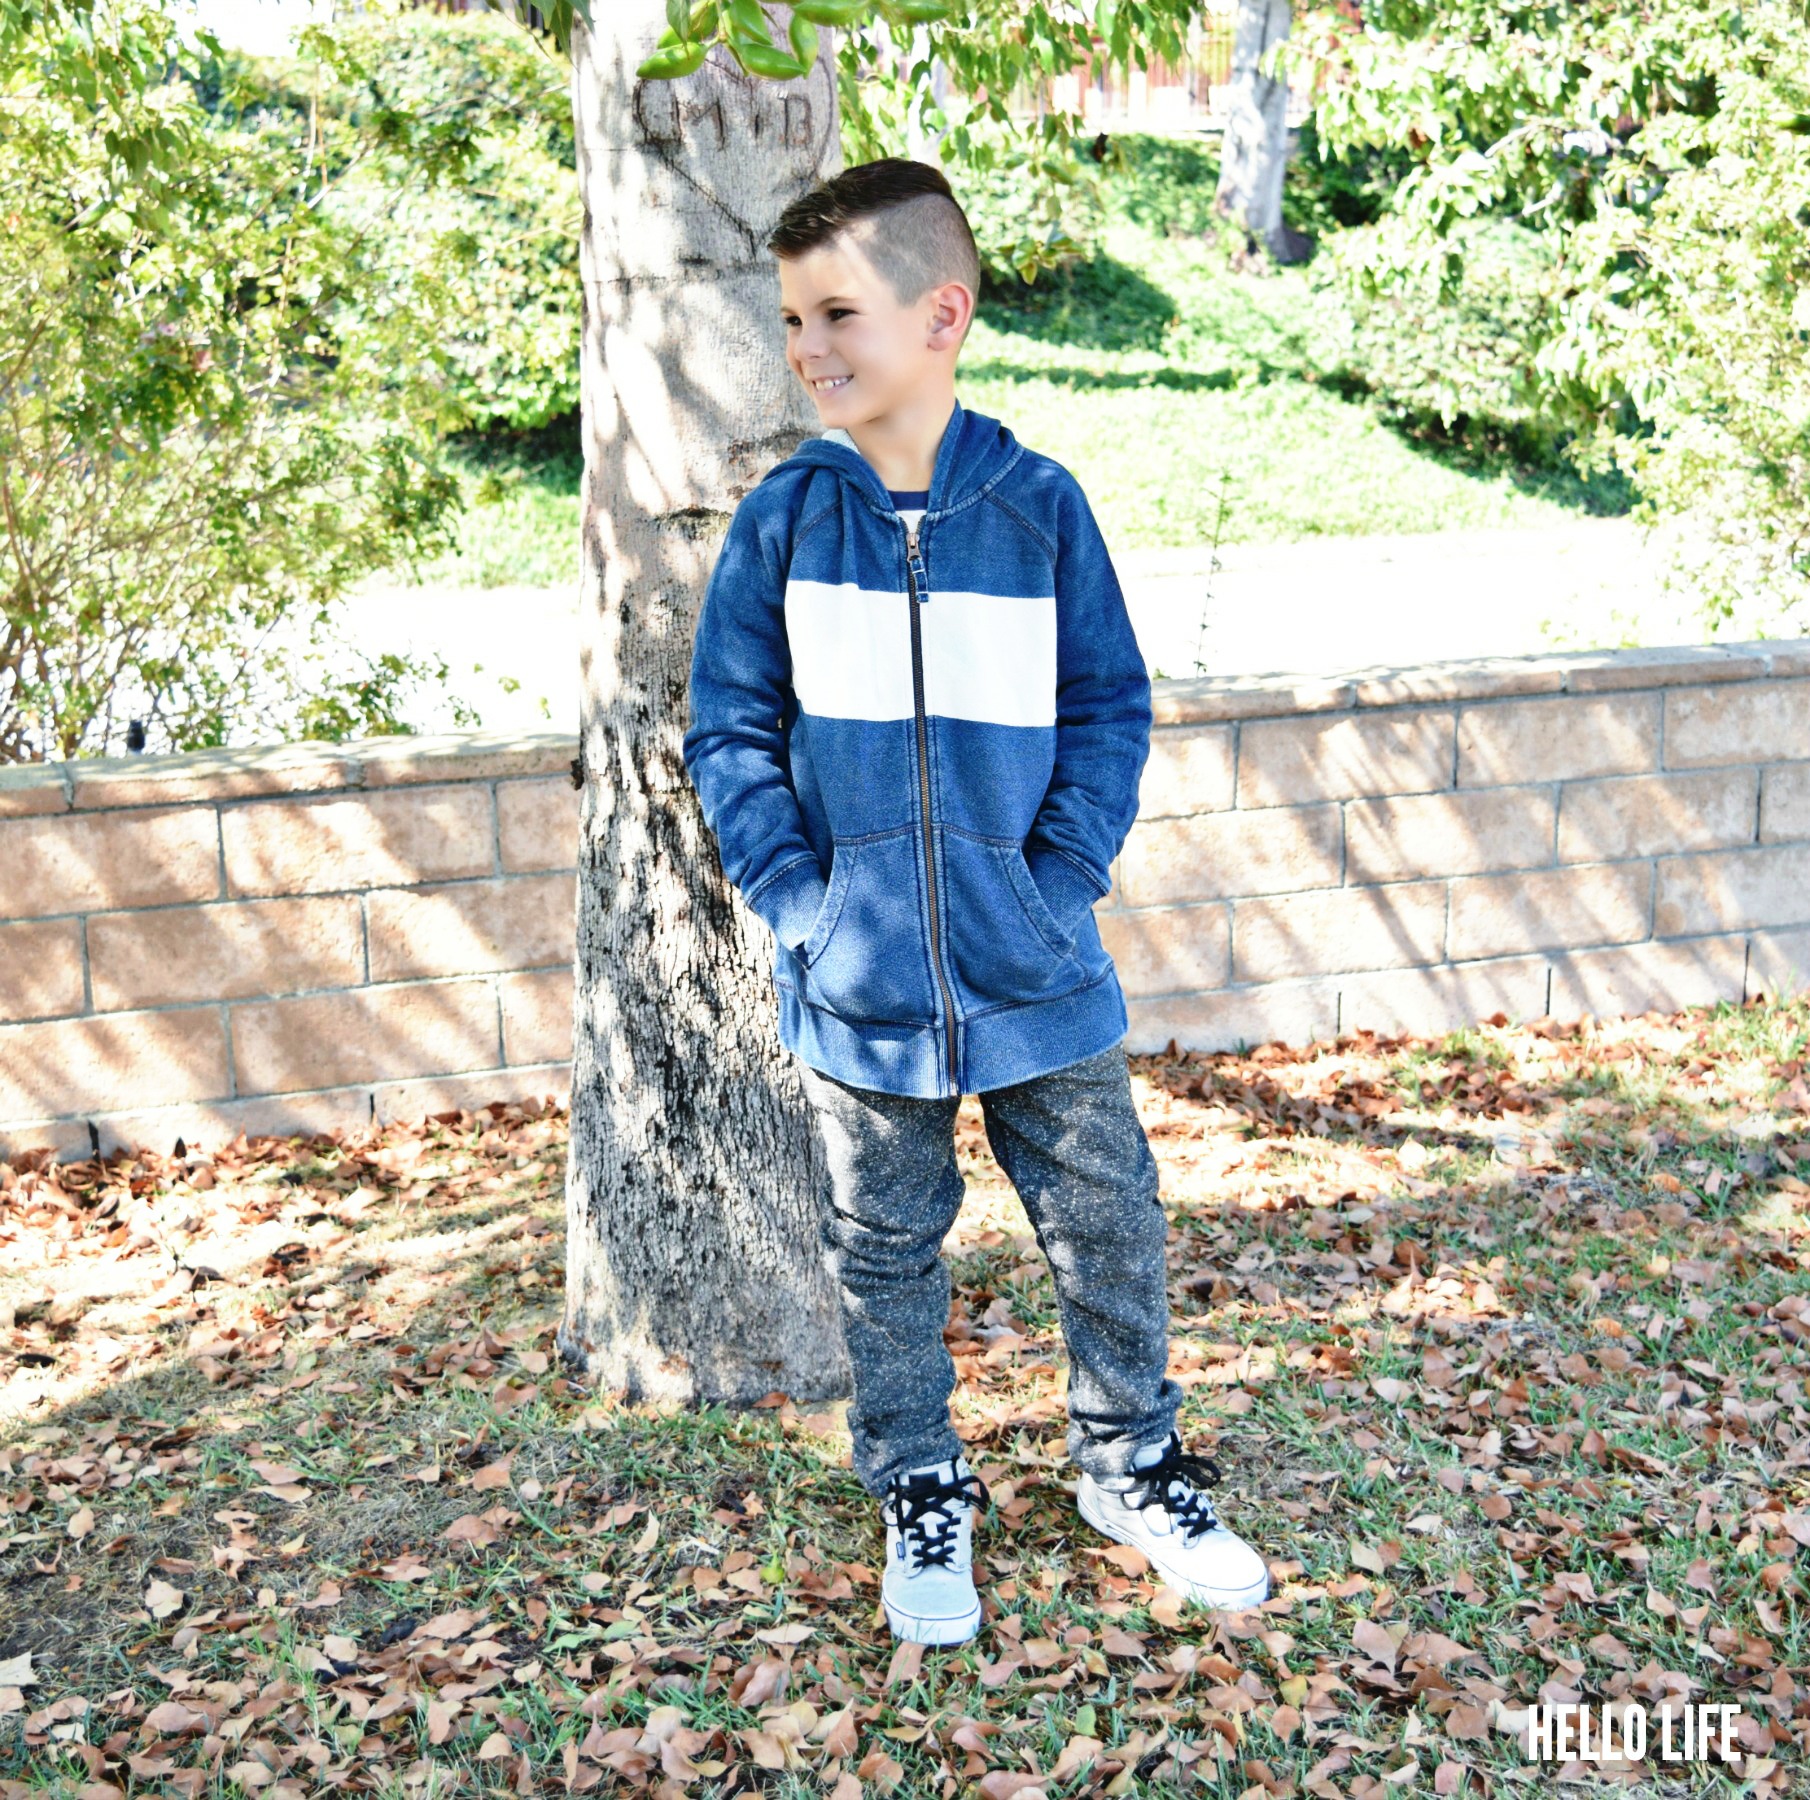 Herringbone Zip-through hoodie from Mini Boden #bodenbyme #BacktoschoolwithBoden, #IC #ad